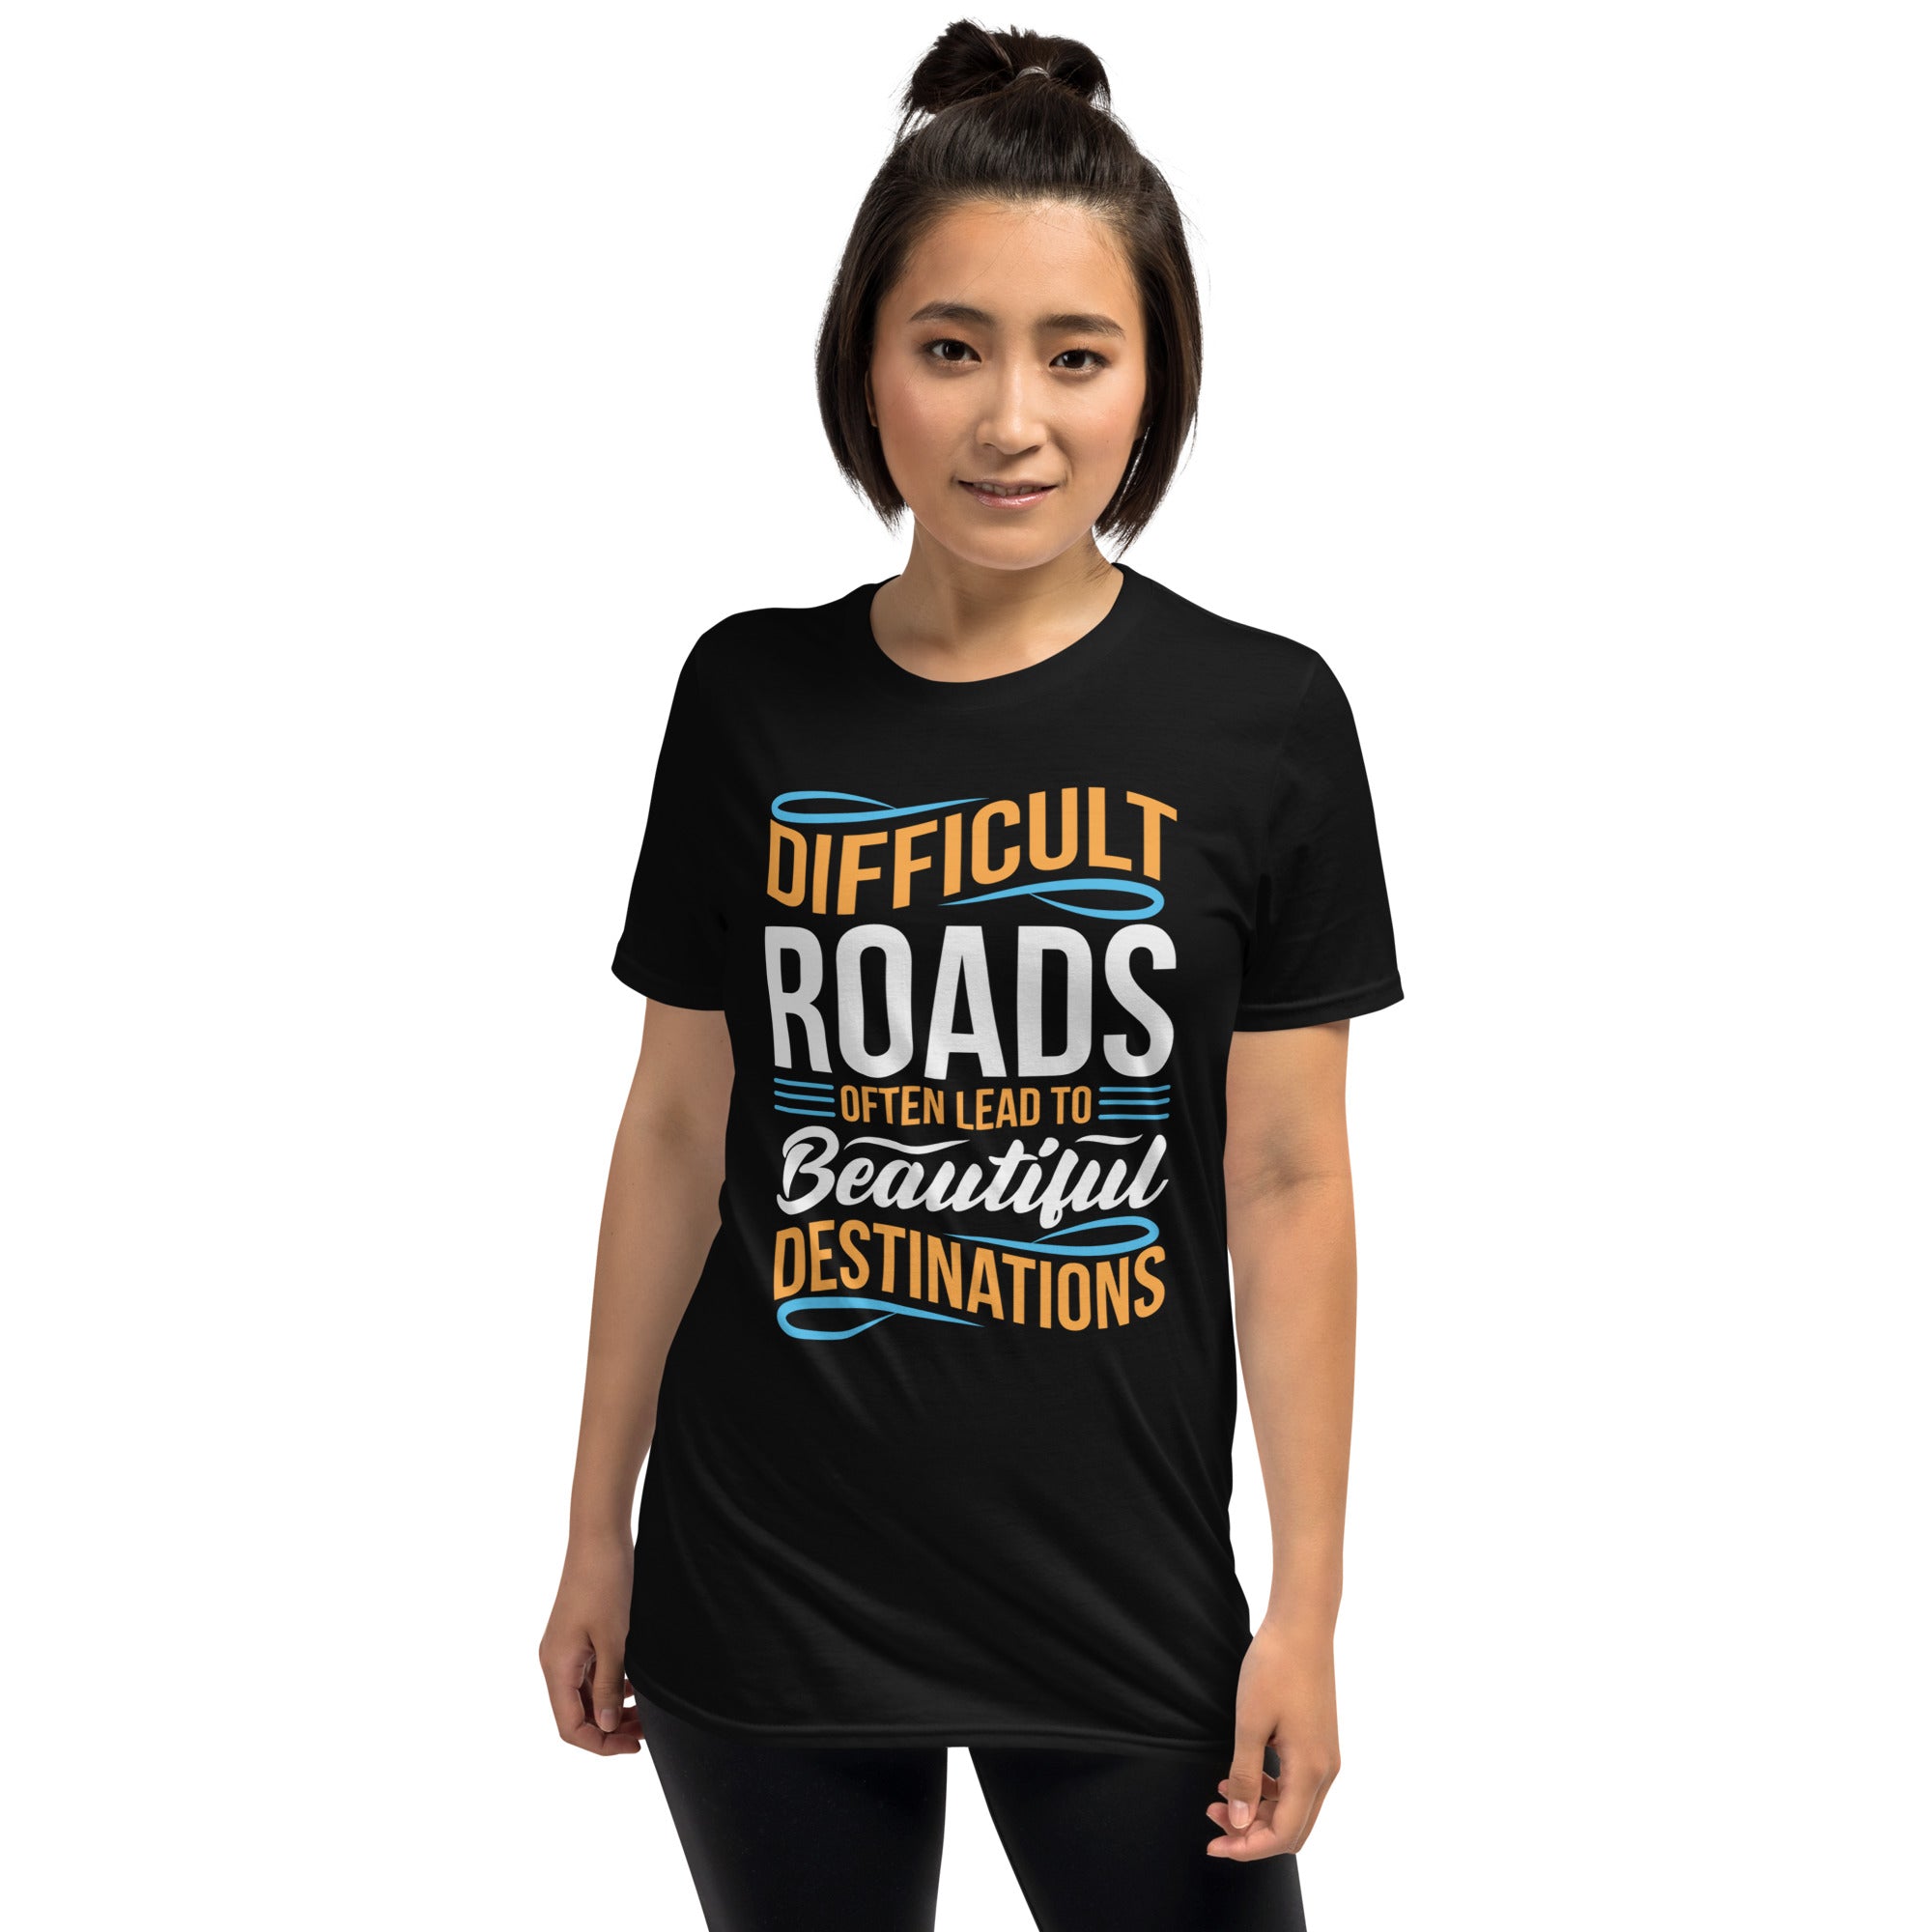 Difficult Road Often Leads To - Short-Sleeve Unisex T-Shirt